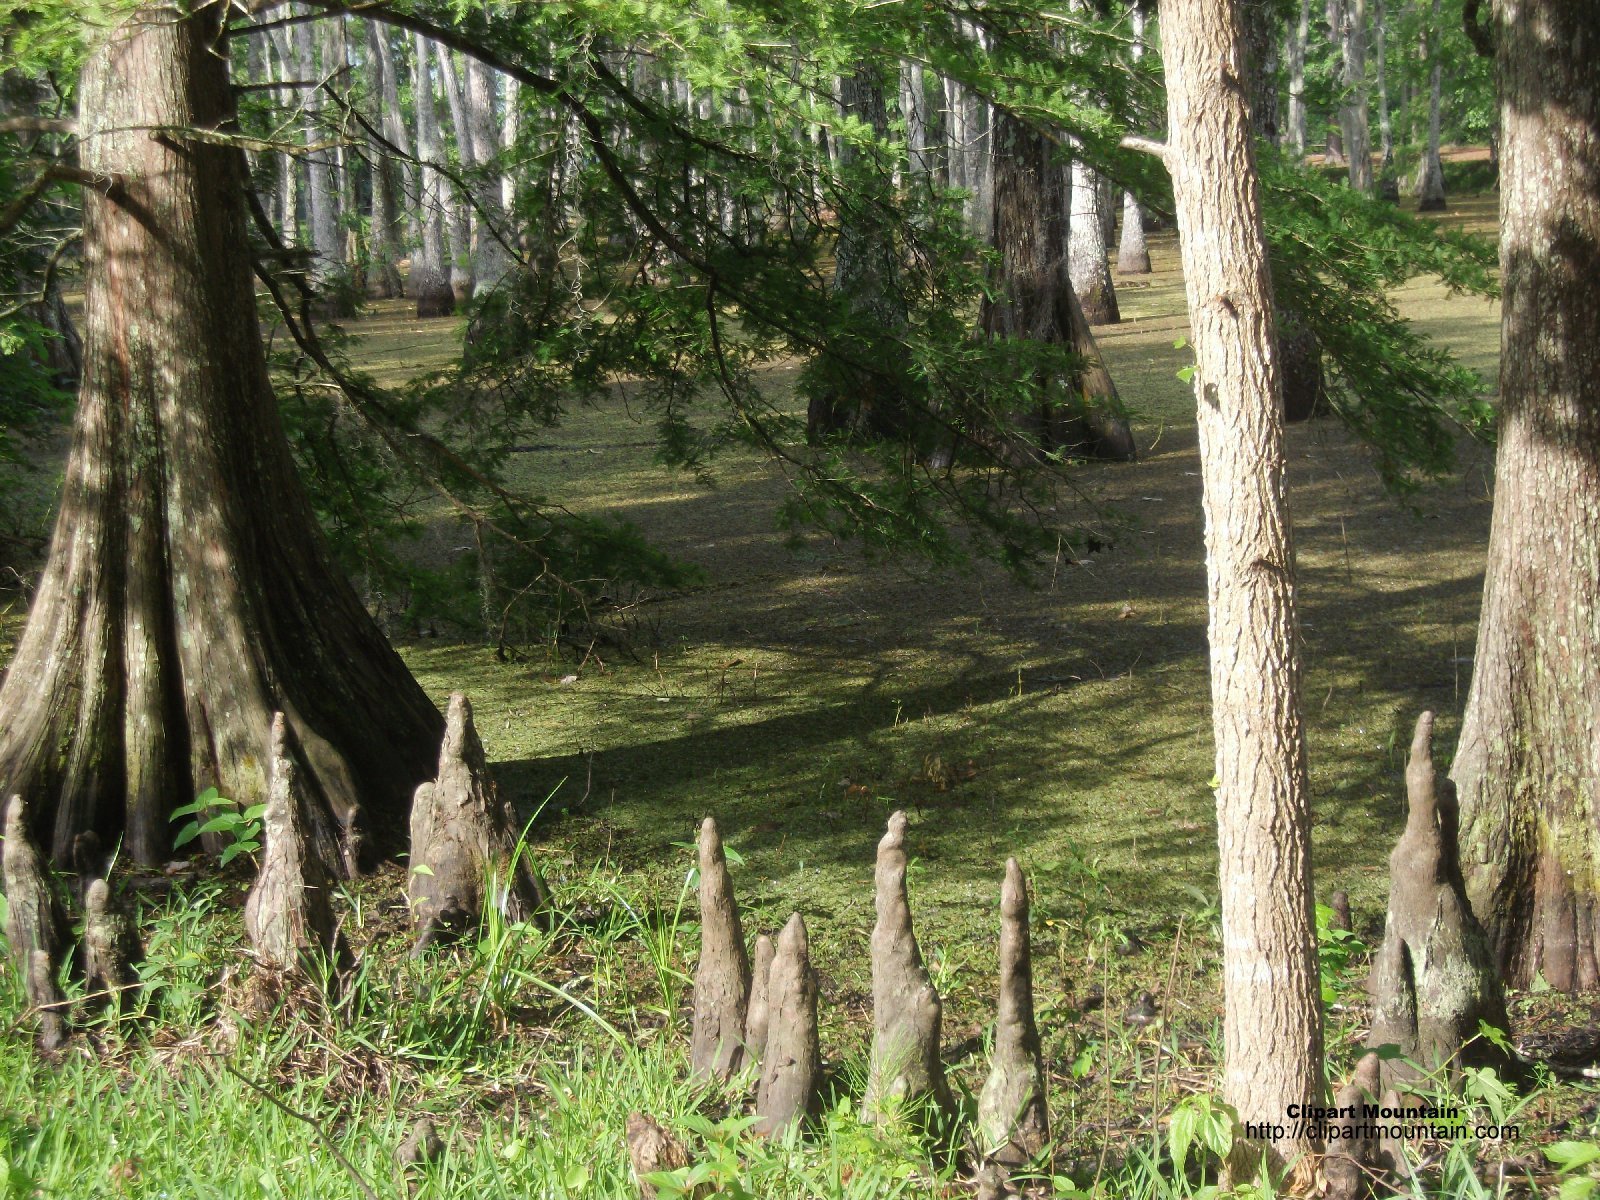 Swamp People Desktop Wallpaper Your laptop and this course 1600x1200